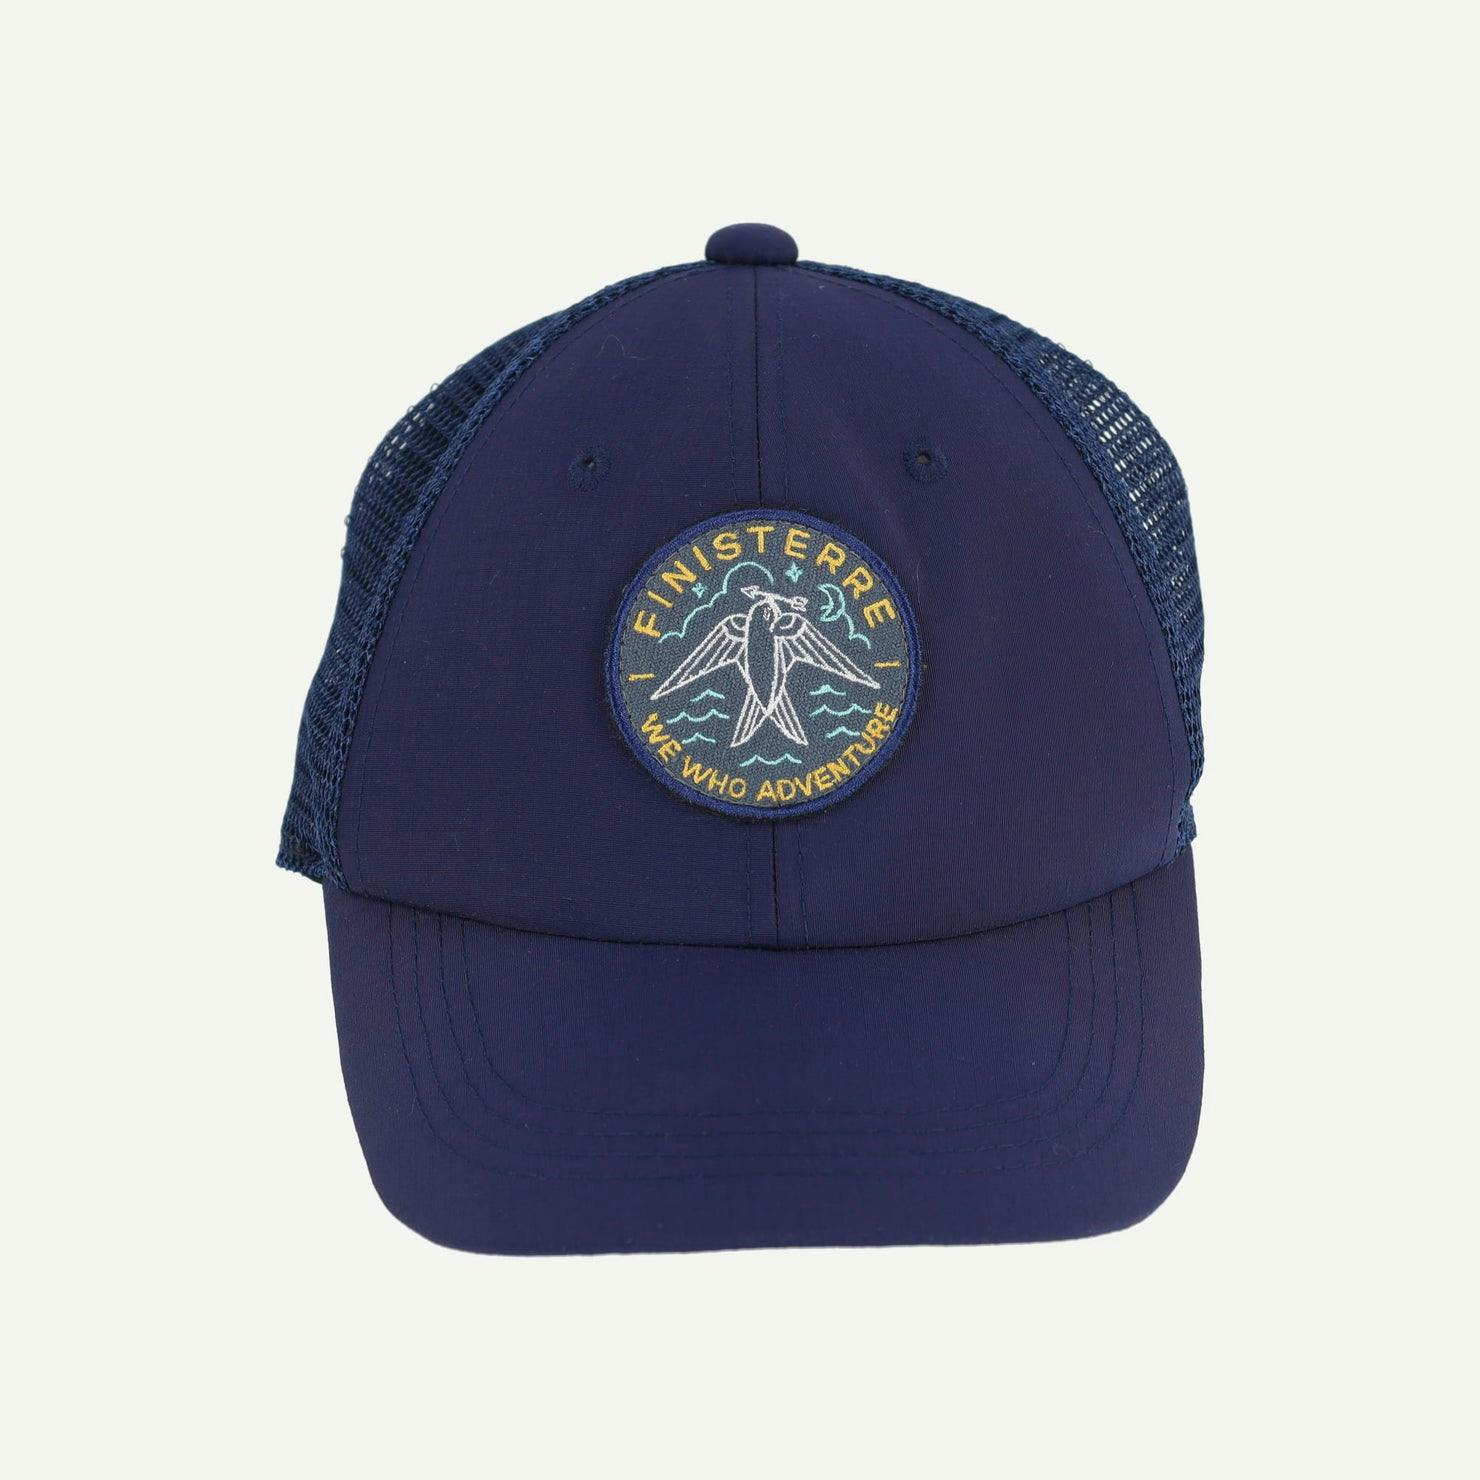 Finisterre As new Blue Hat